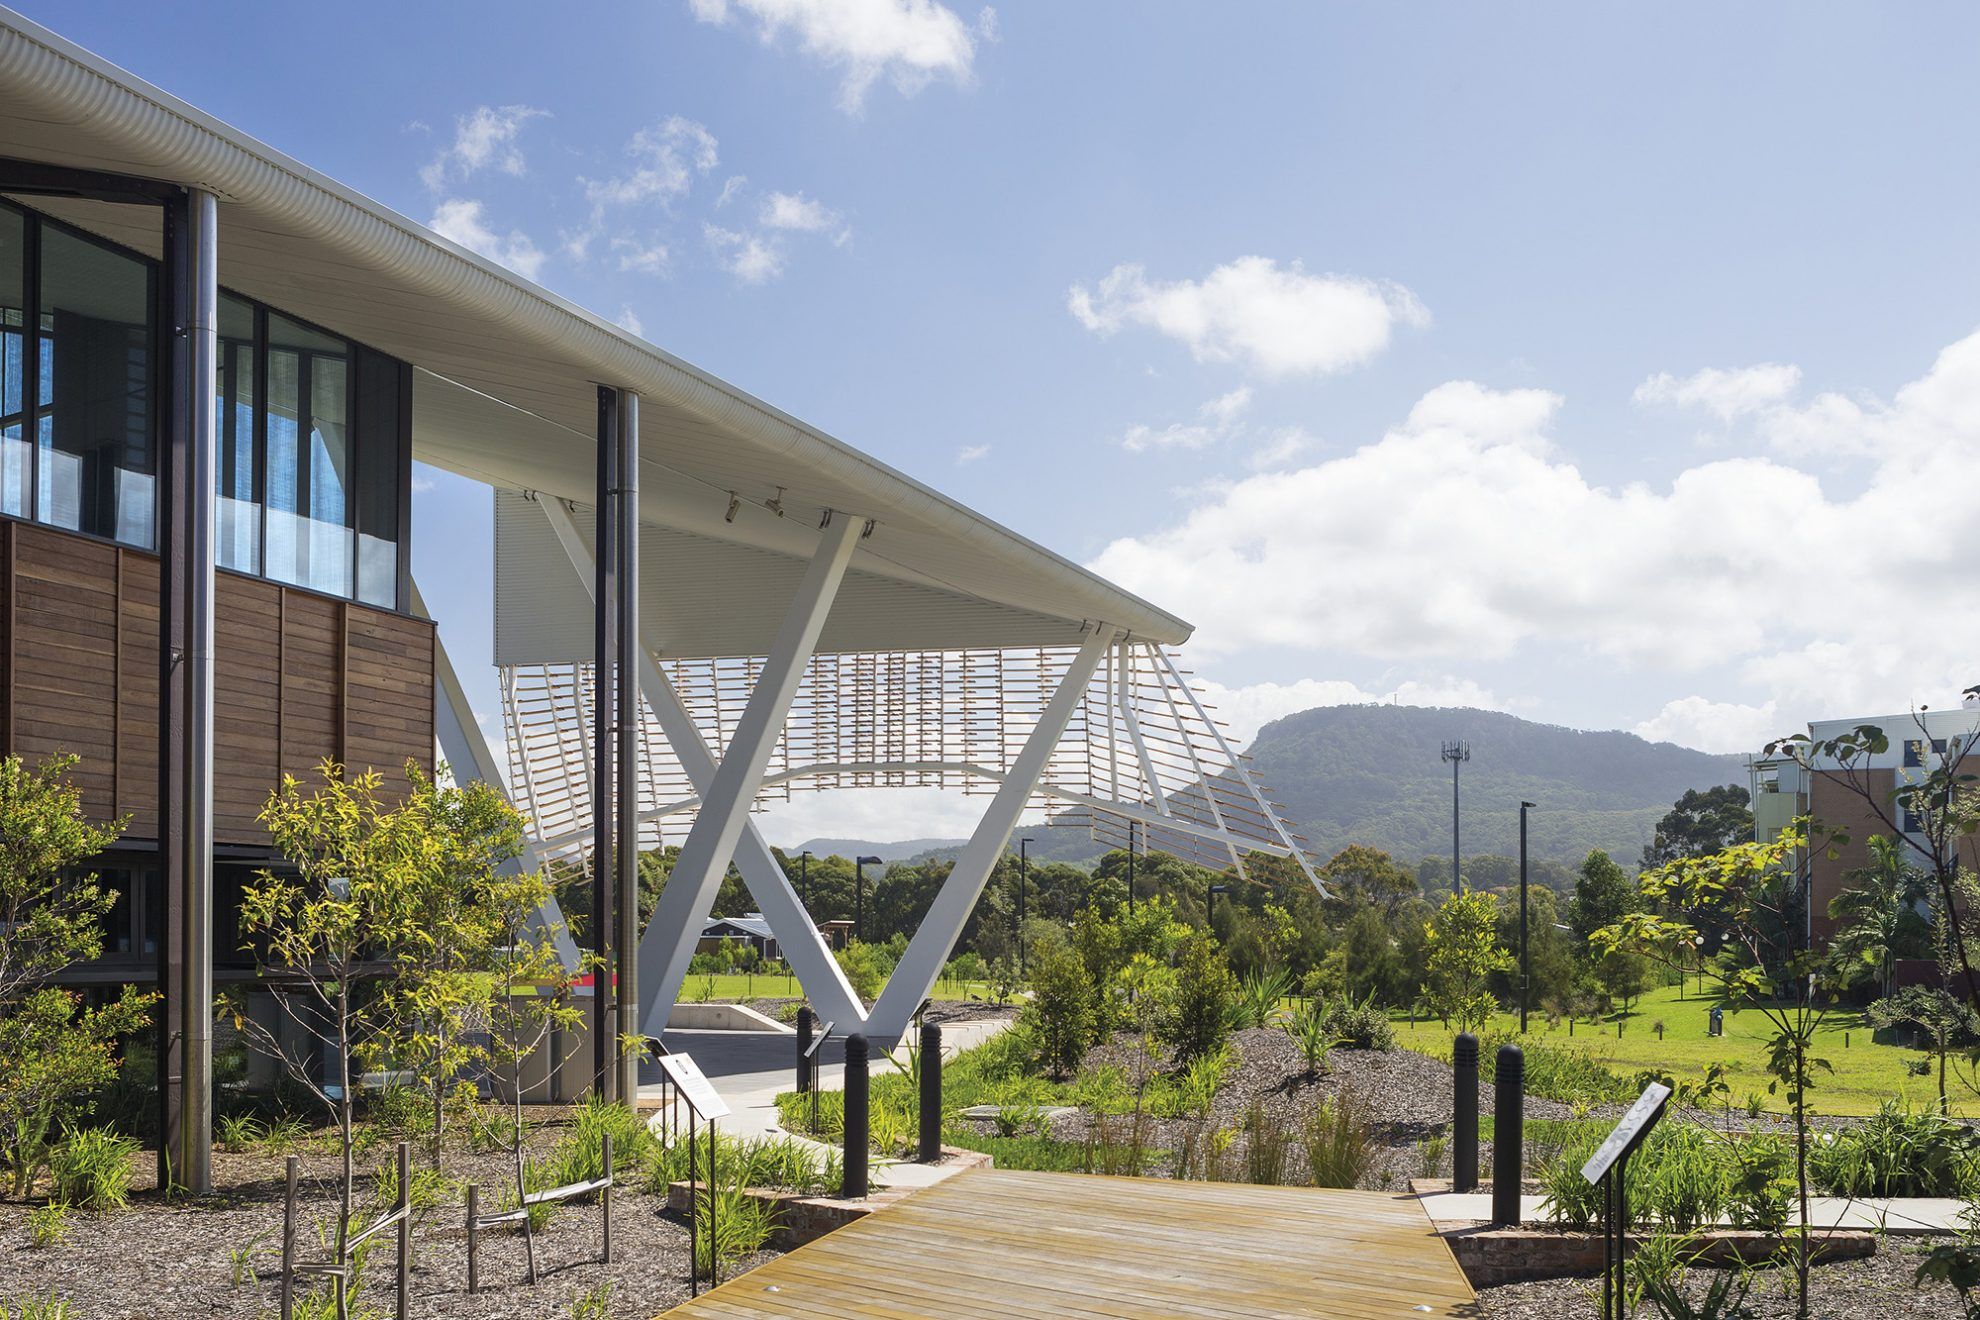 Wollongong University's Sustainable Buildings Research Centre by COX Architecture